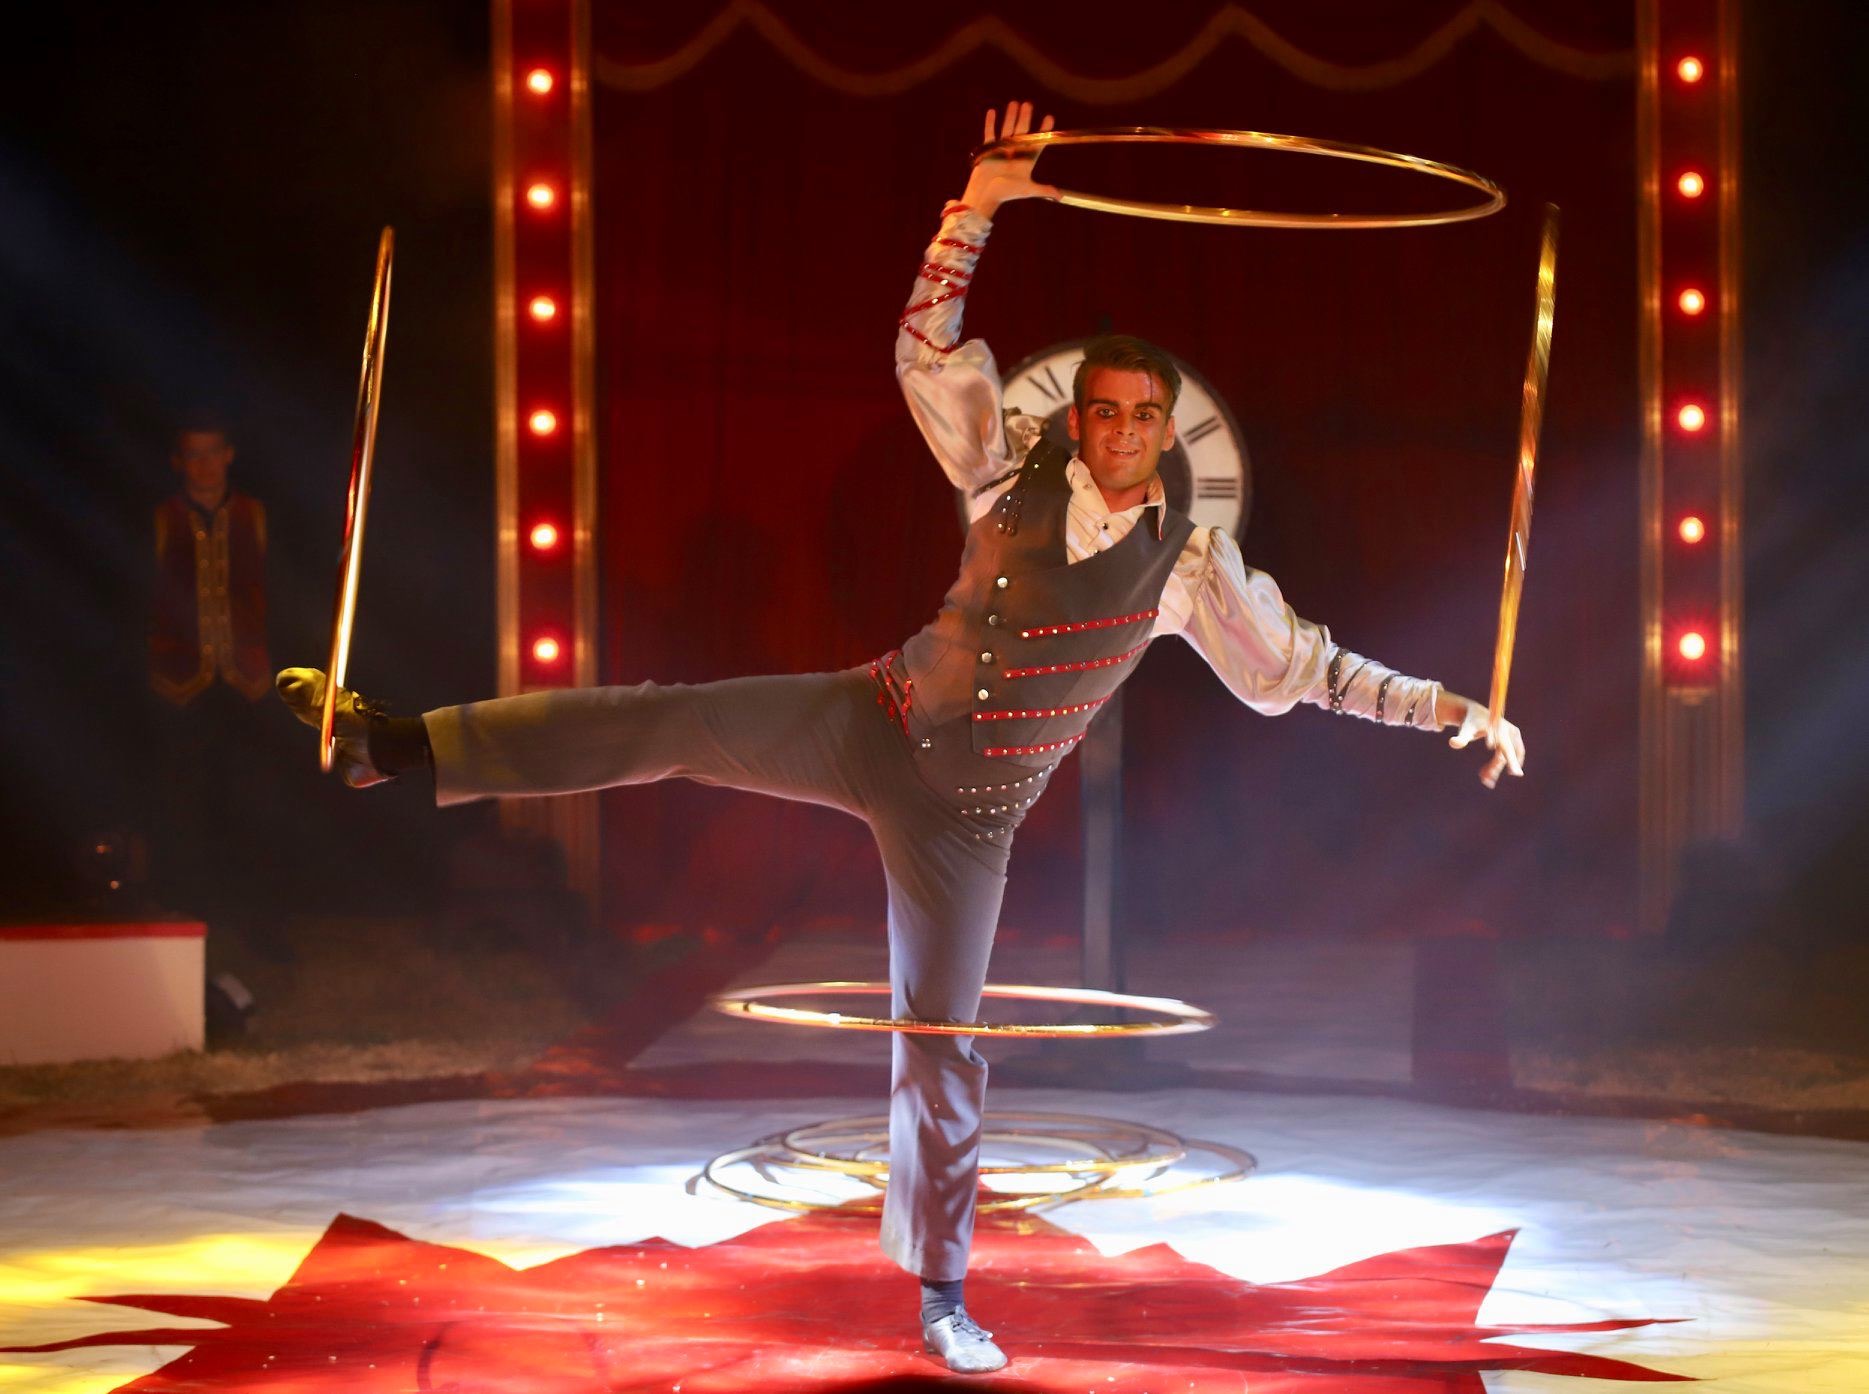 Starting of dreaming to be a circus performer